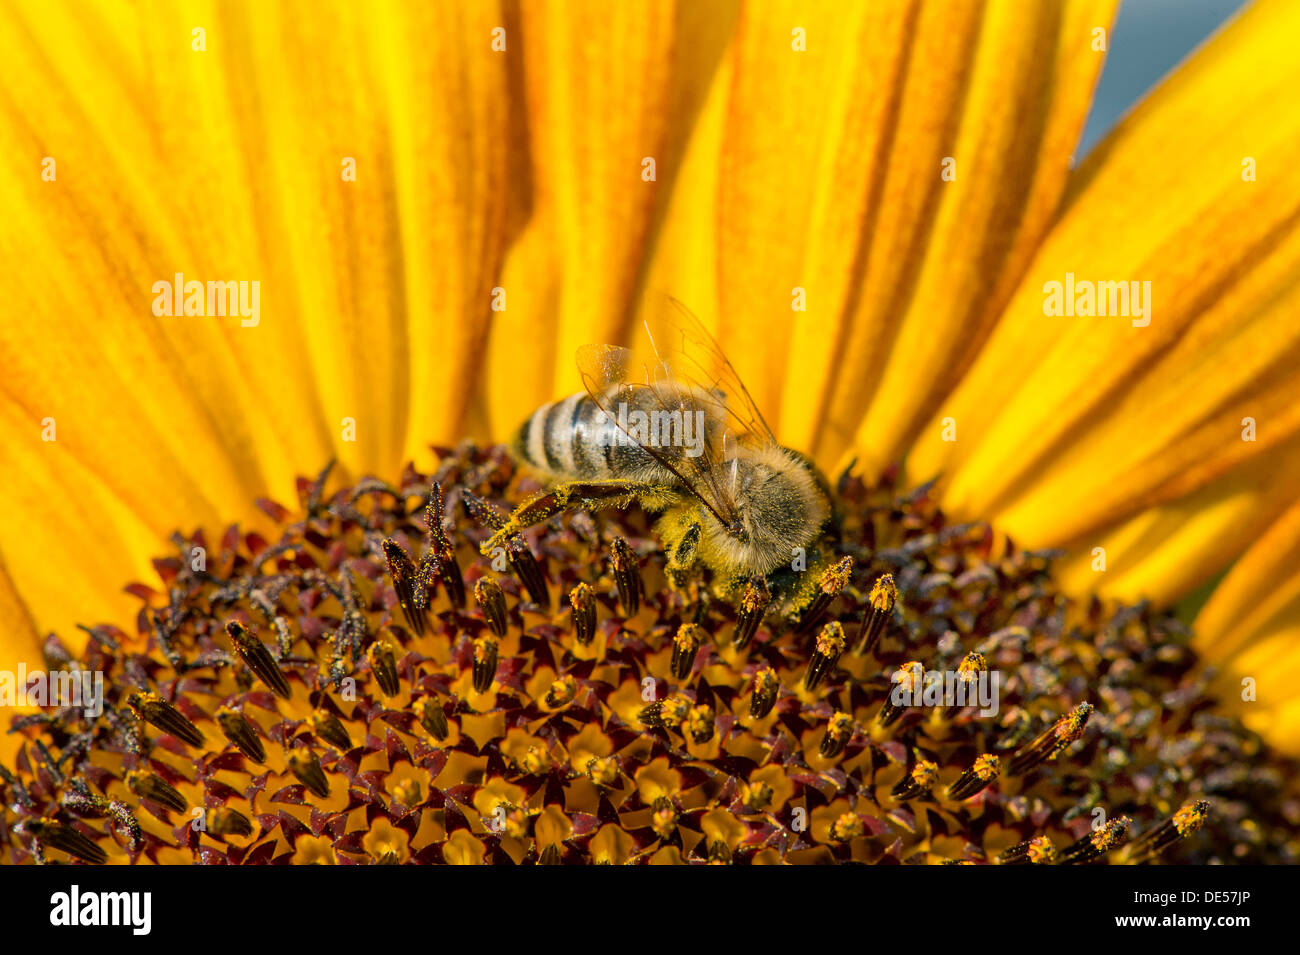 Western honey bee (Apis mellifera) perched on a sunflower (Helianthus annuus), detailed view of the blossom, Stuttgart Stock Photo